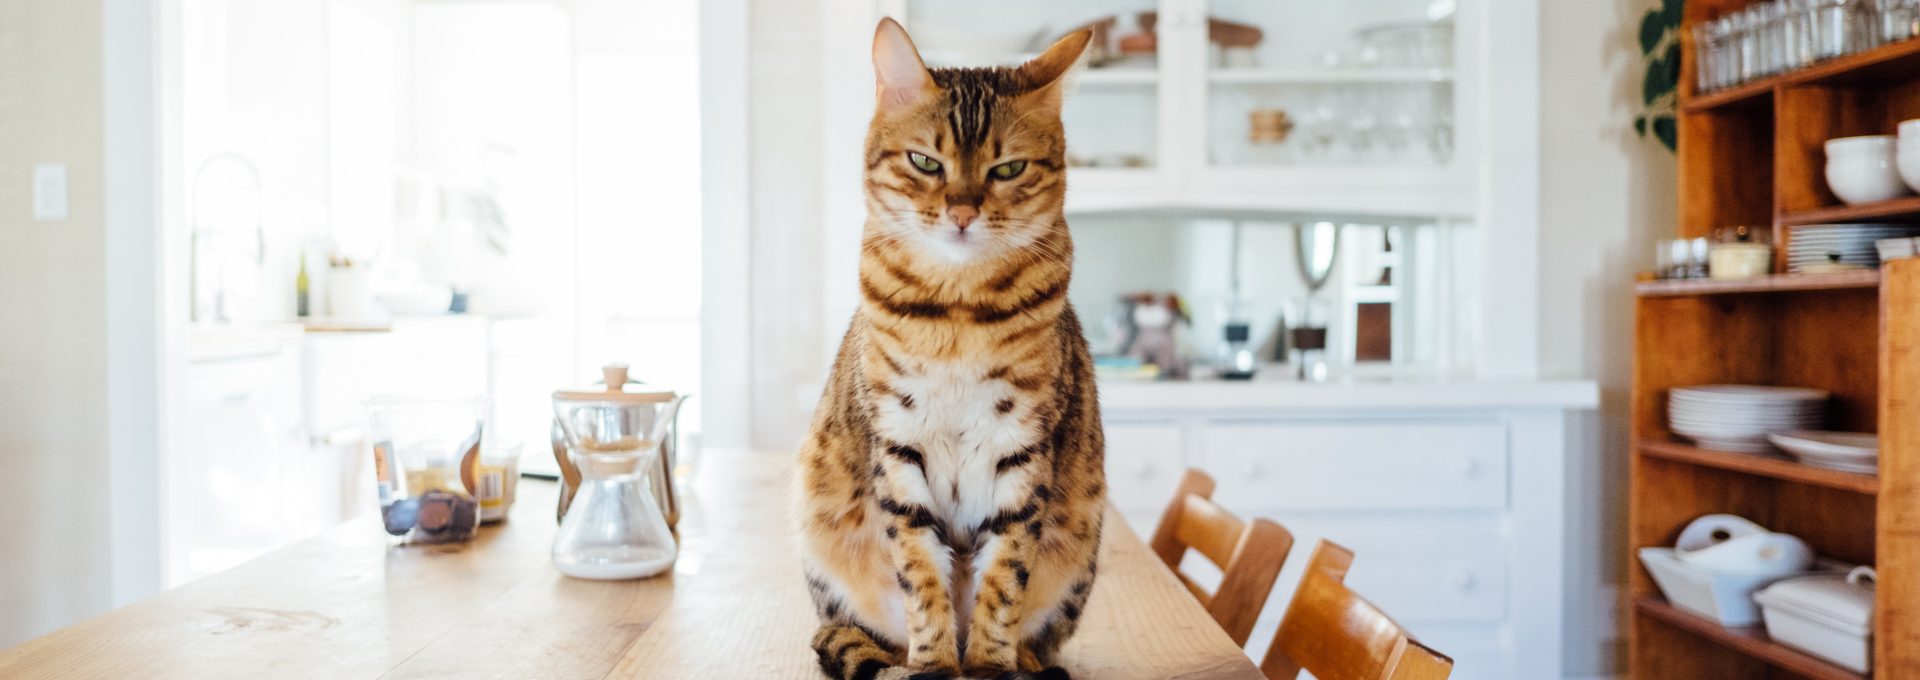 orange and white tabby cat sitting on brown wooden table in kitchen room